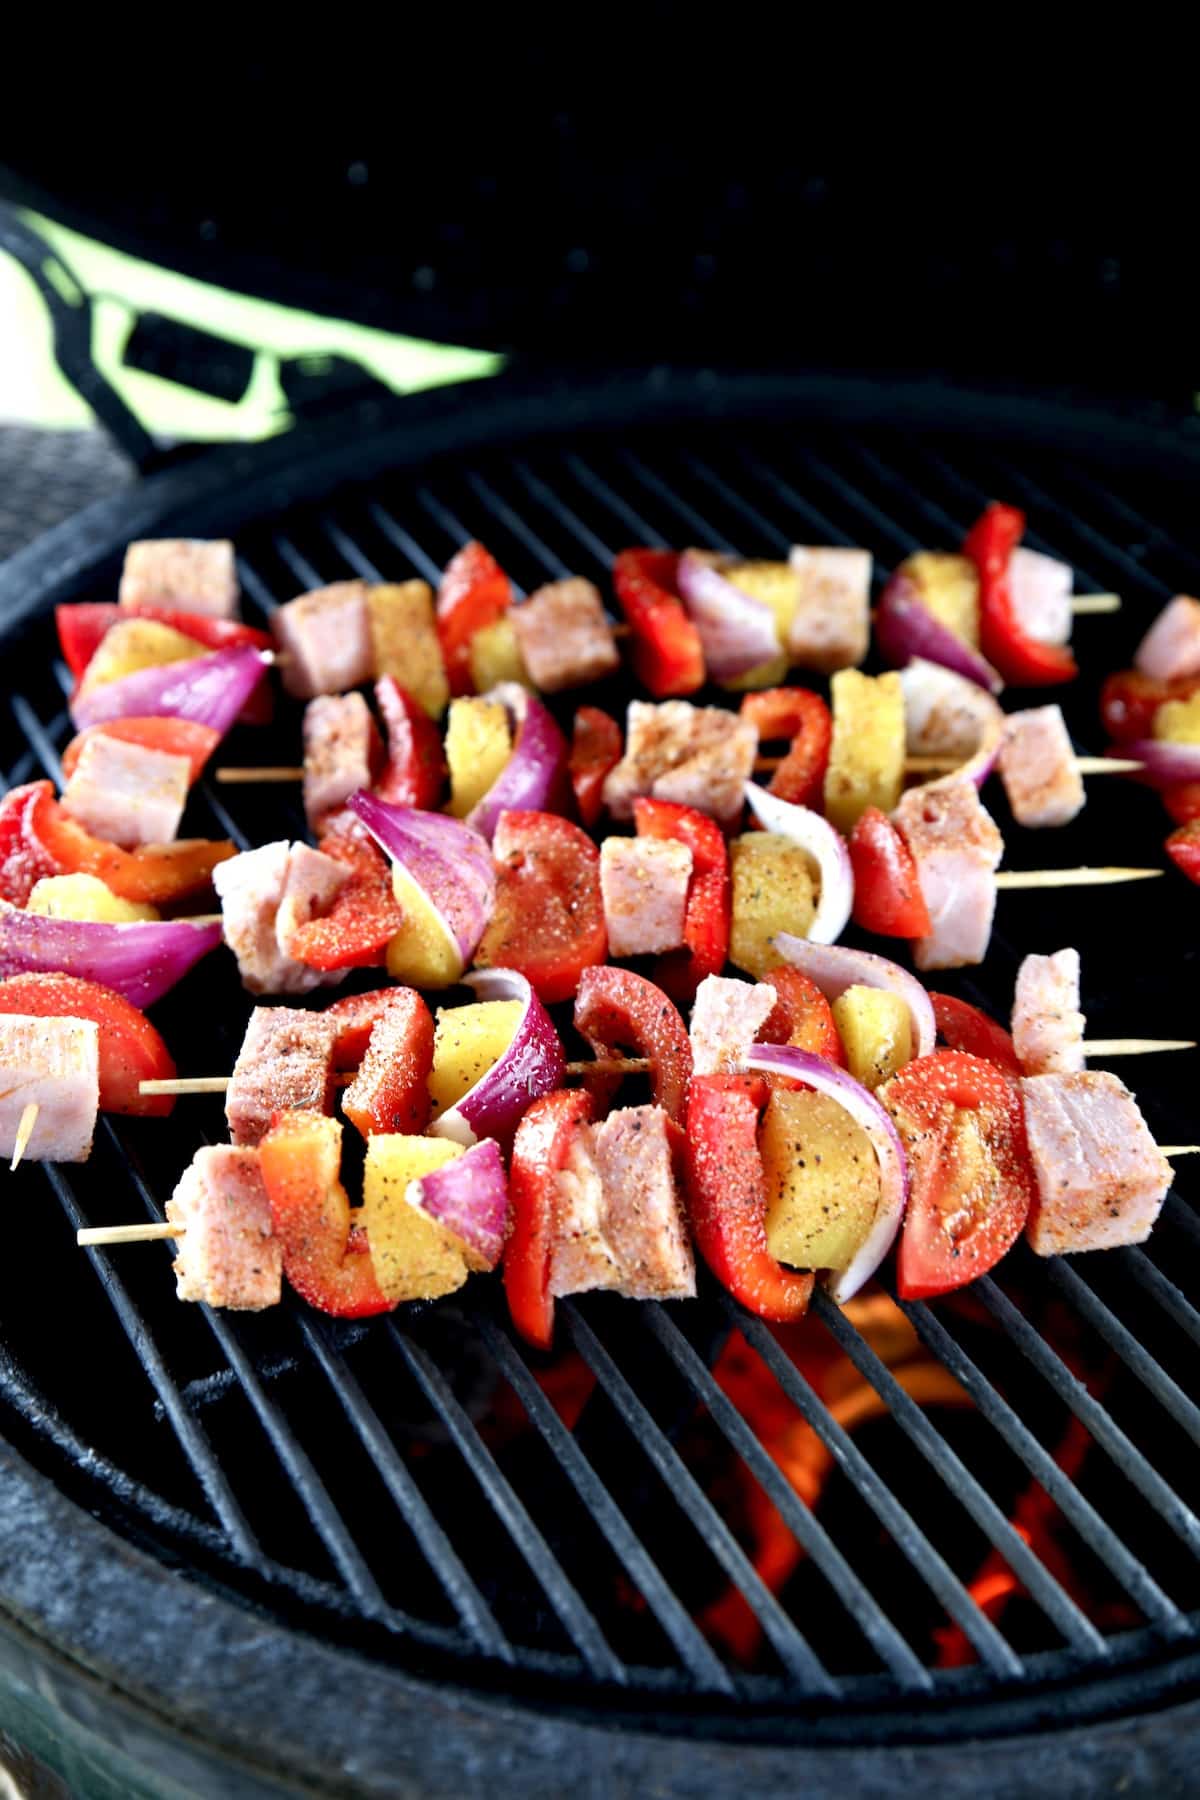 Grilling kabobs with ham, pineapple, vegetables.